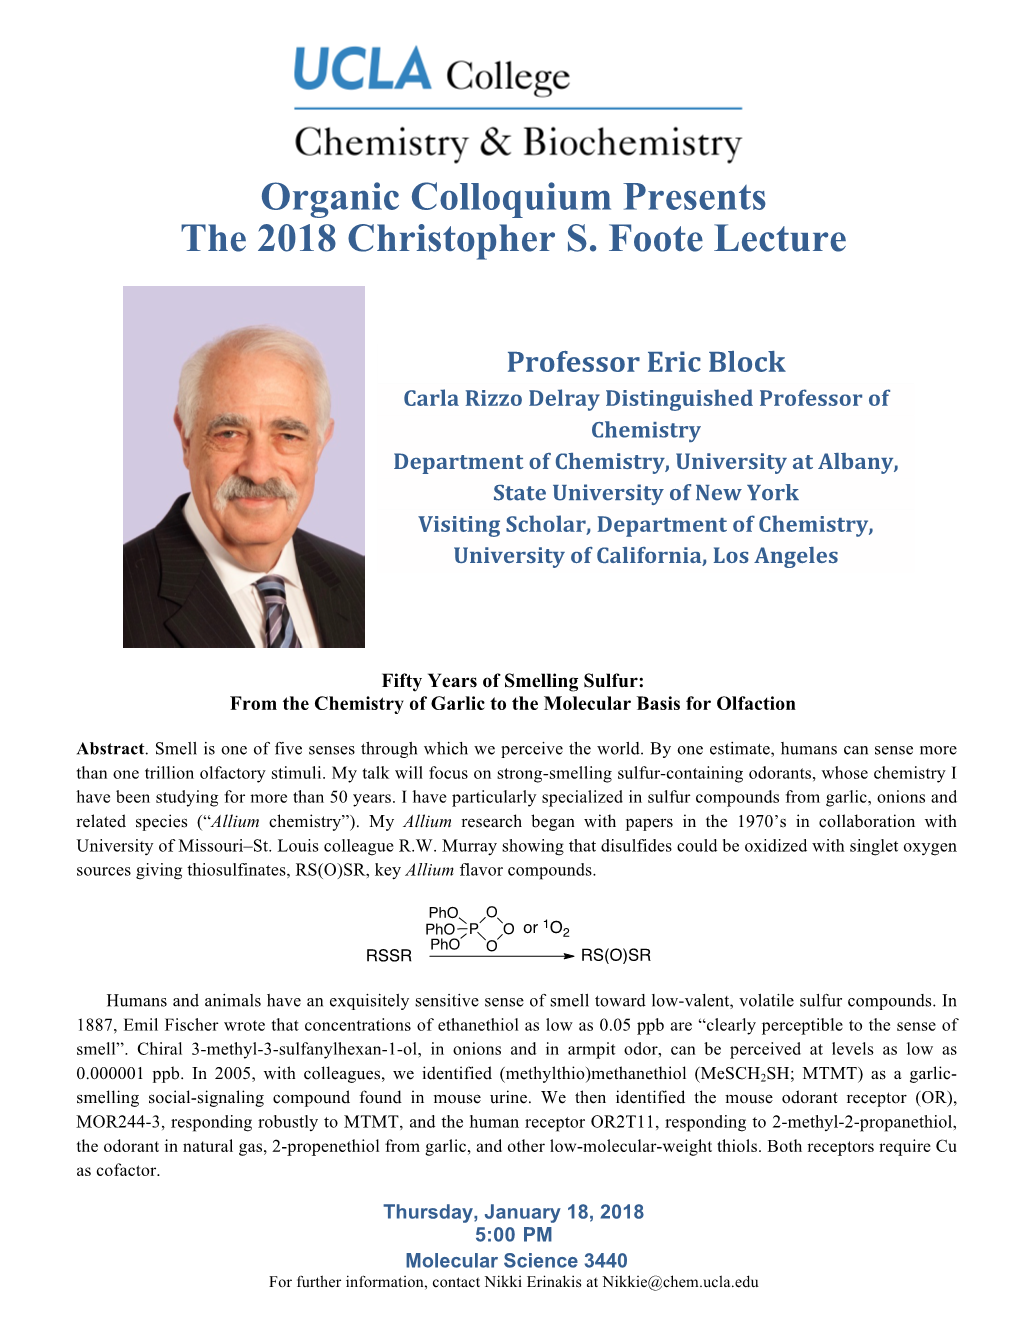 Organic Colloquium Presents the 2018 Christopher S. Foote Lecture